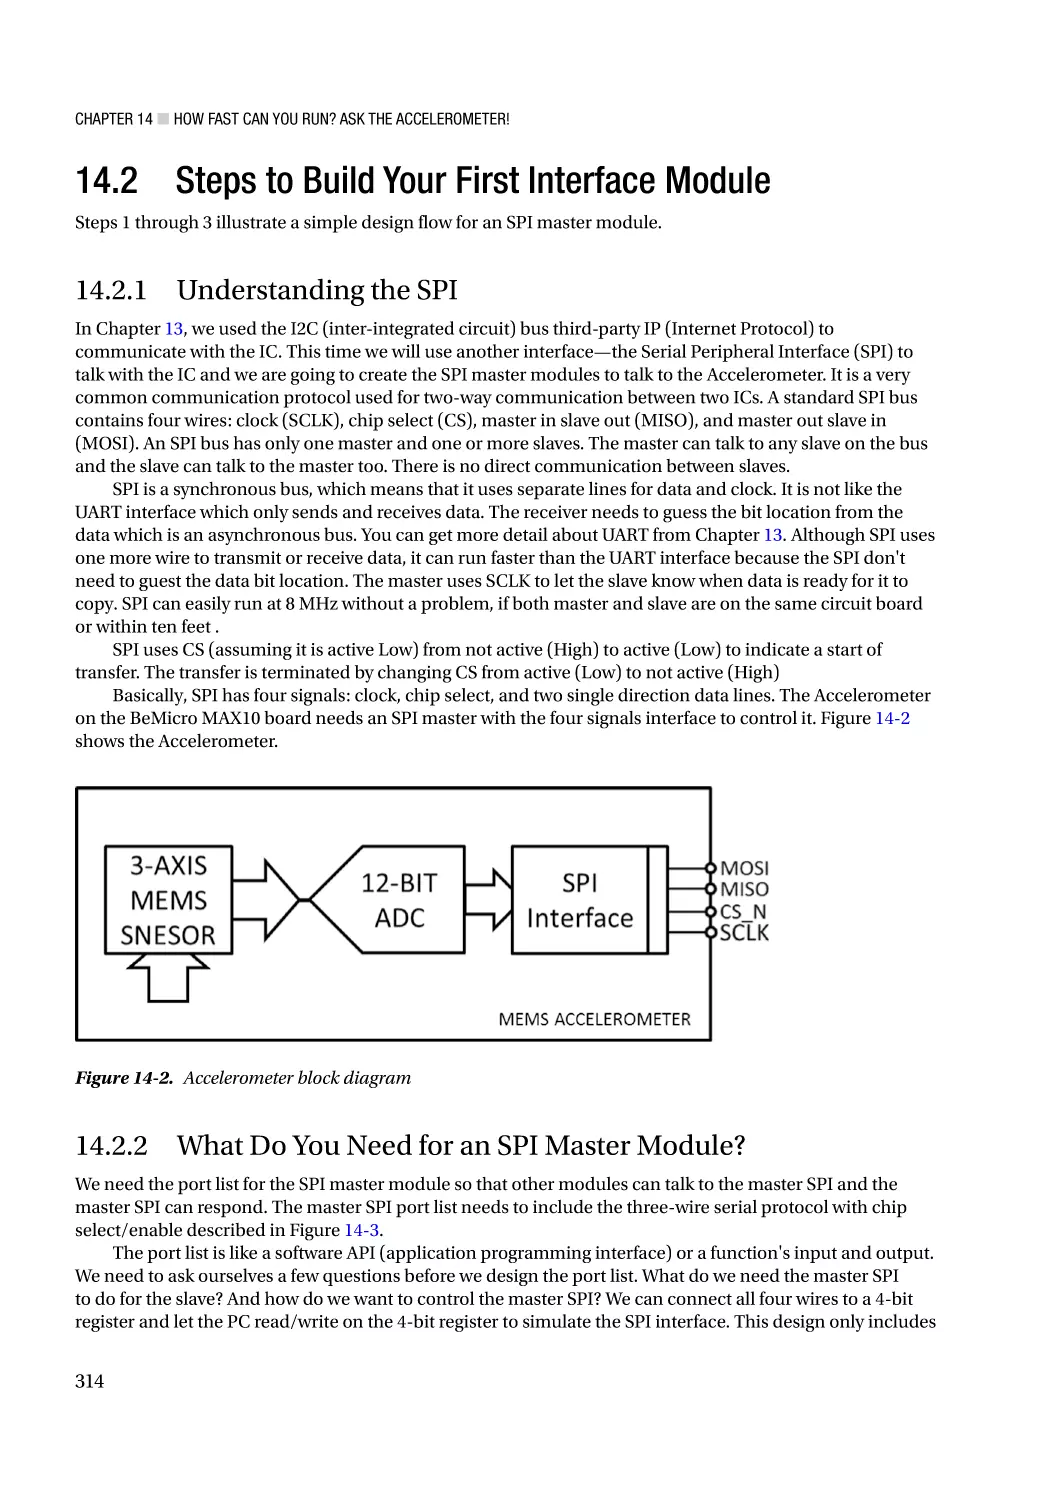 14.2 Steps to Build Your First Interface Module
14.2.1 Understanding the SPI
14.2.2 What Do You Need for an SPI Master Module?